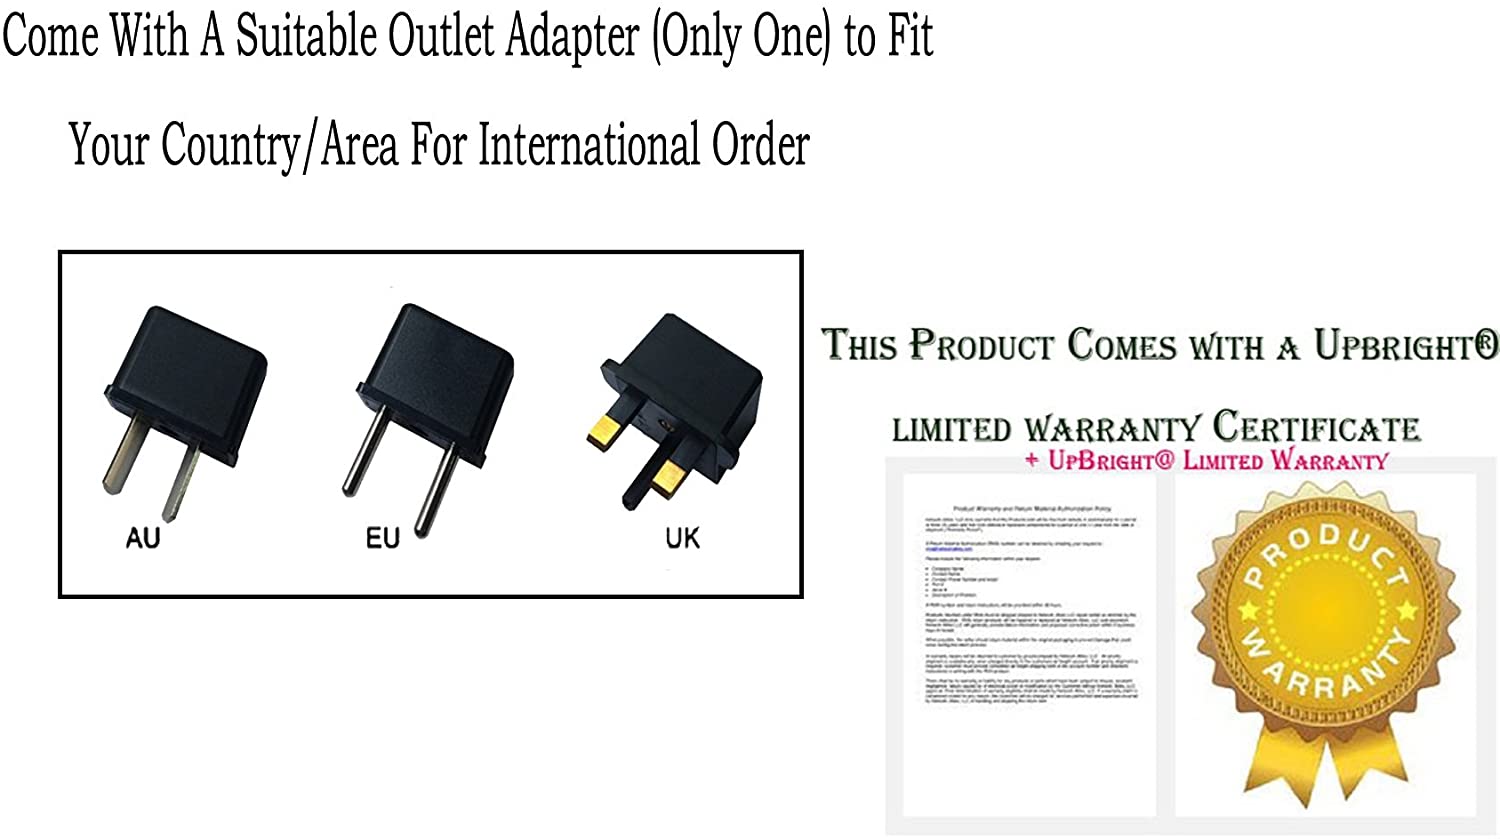 Cisco Aironet AIR-PWR-A Power Adapter - image 4 of 5